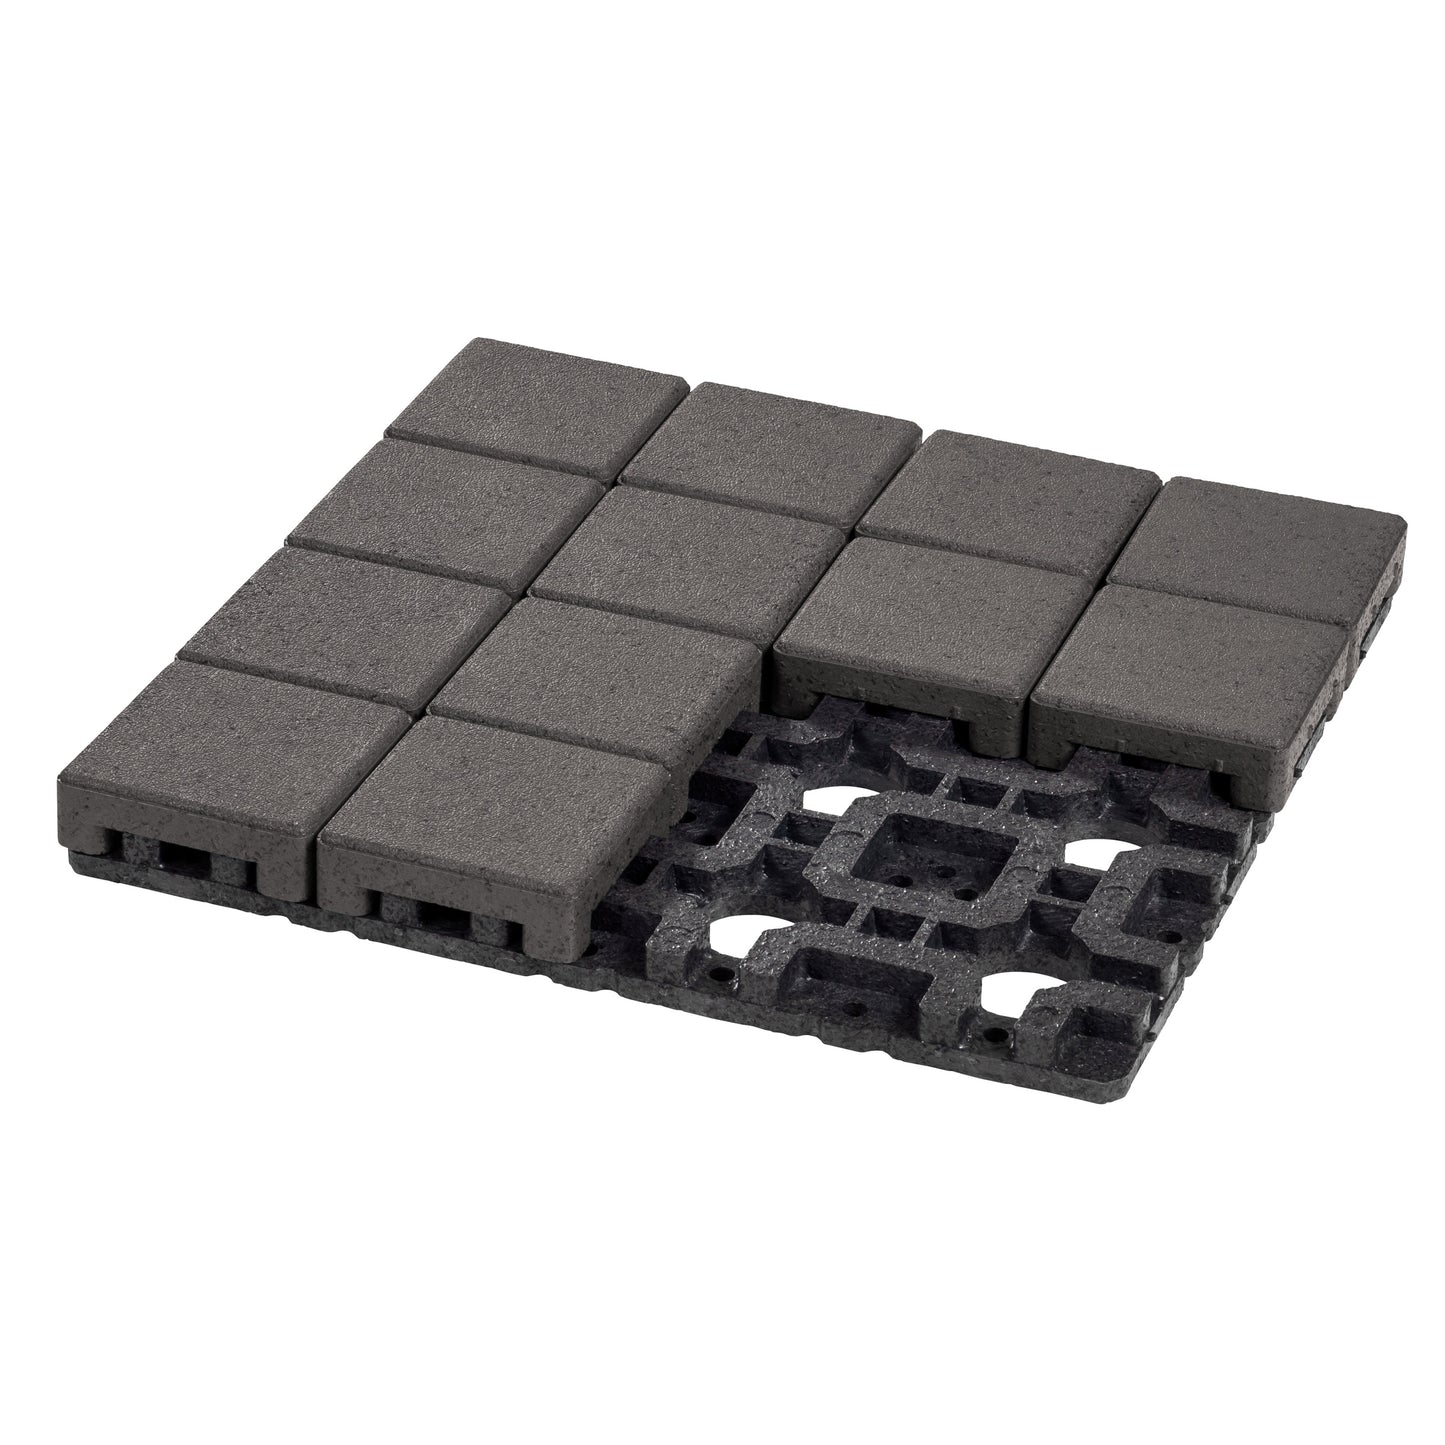 Aspire Pavers with Grid (16 - 4" x 4" Pavers on 16" x 16" Grid)